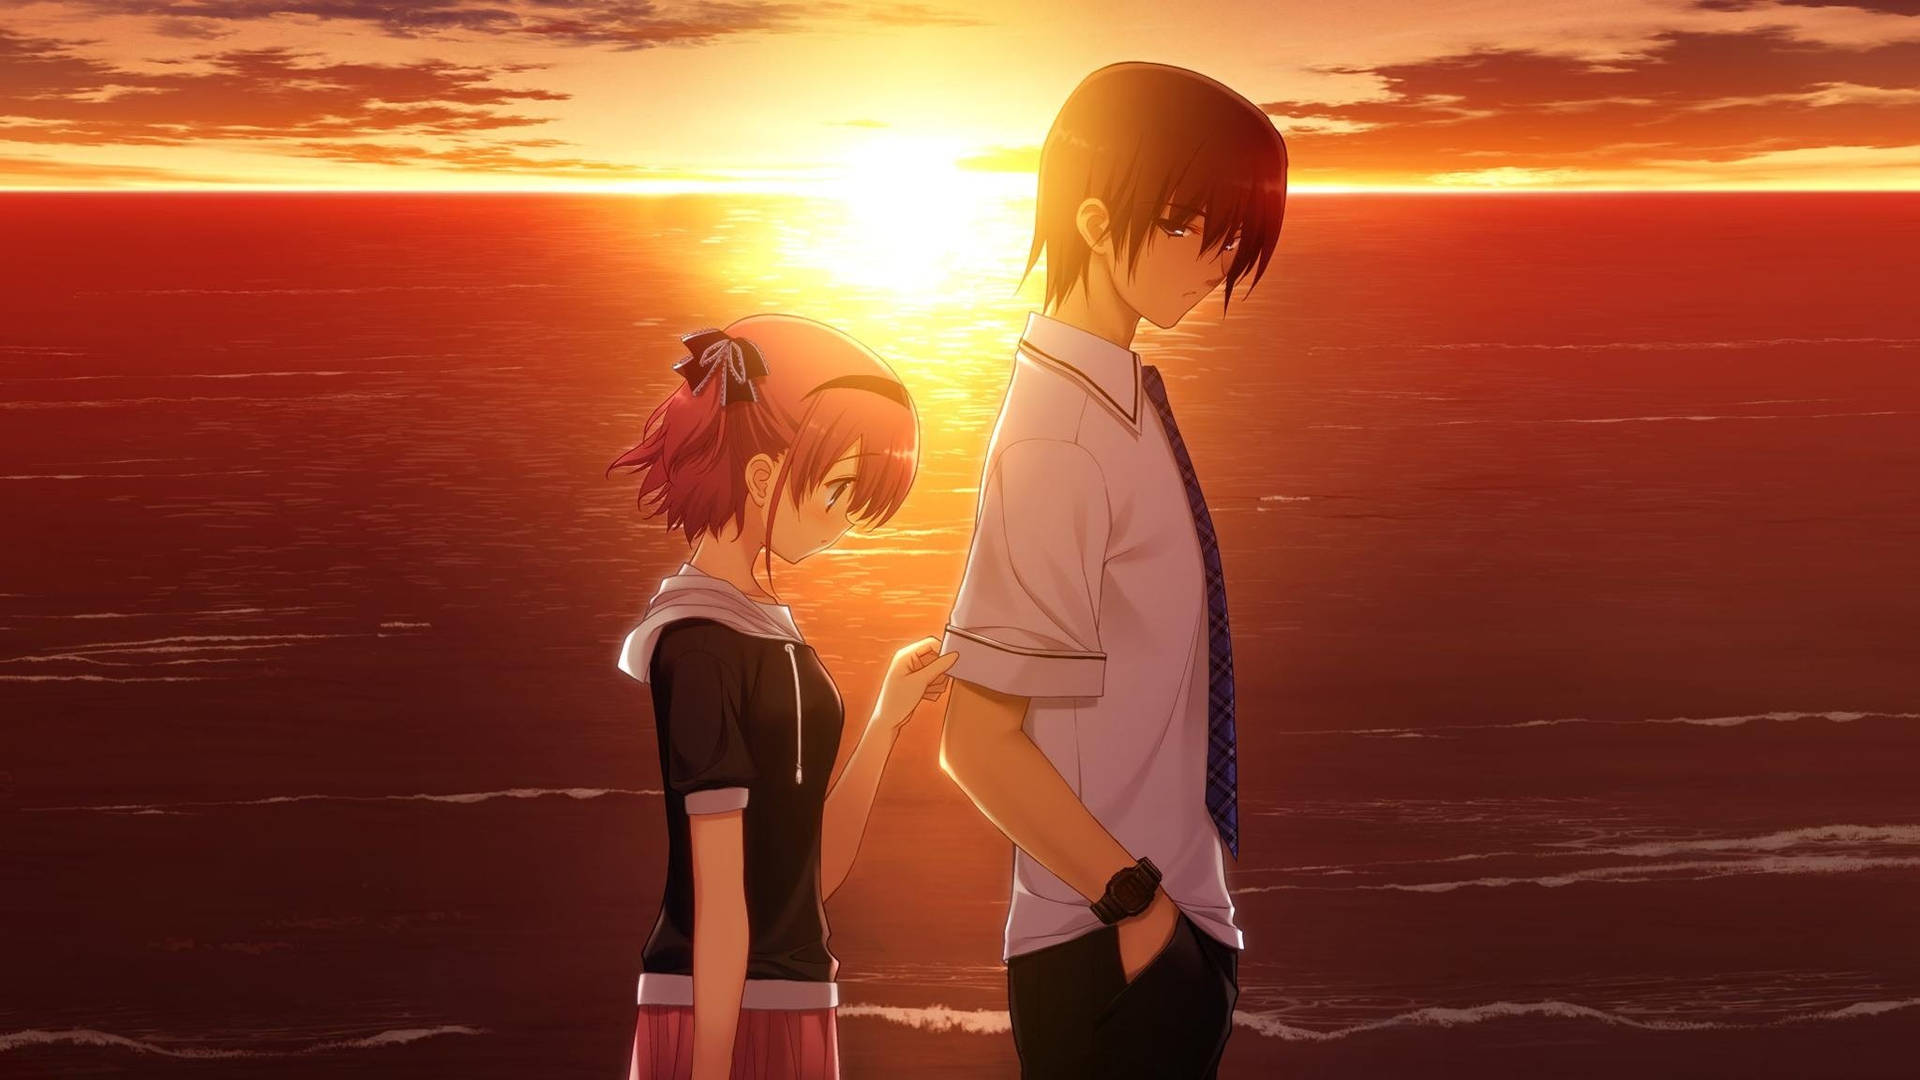 Cute Anime Couple Together At Sunset Background